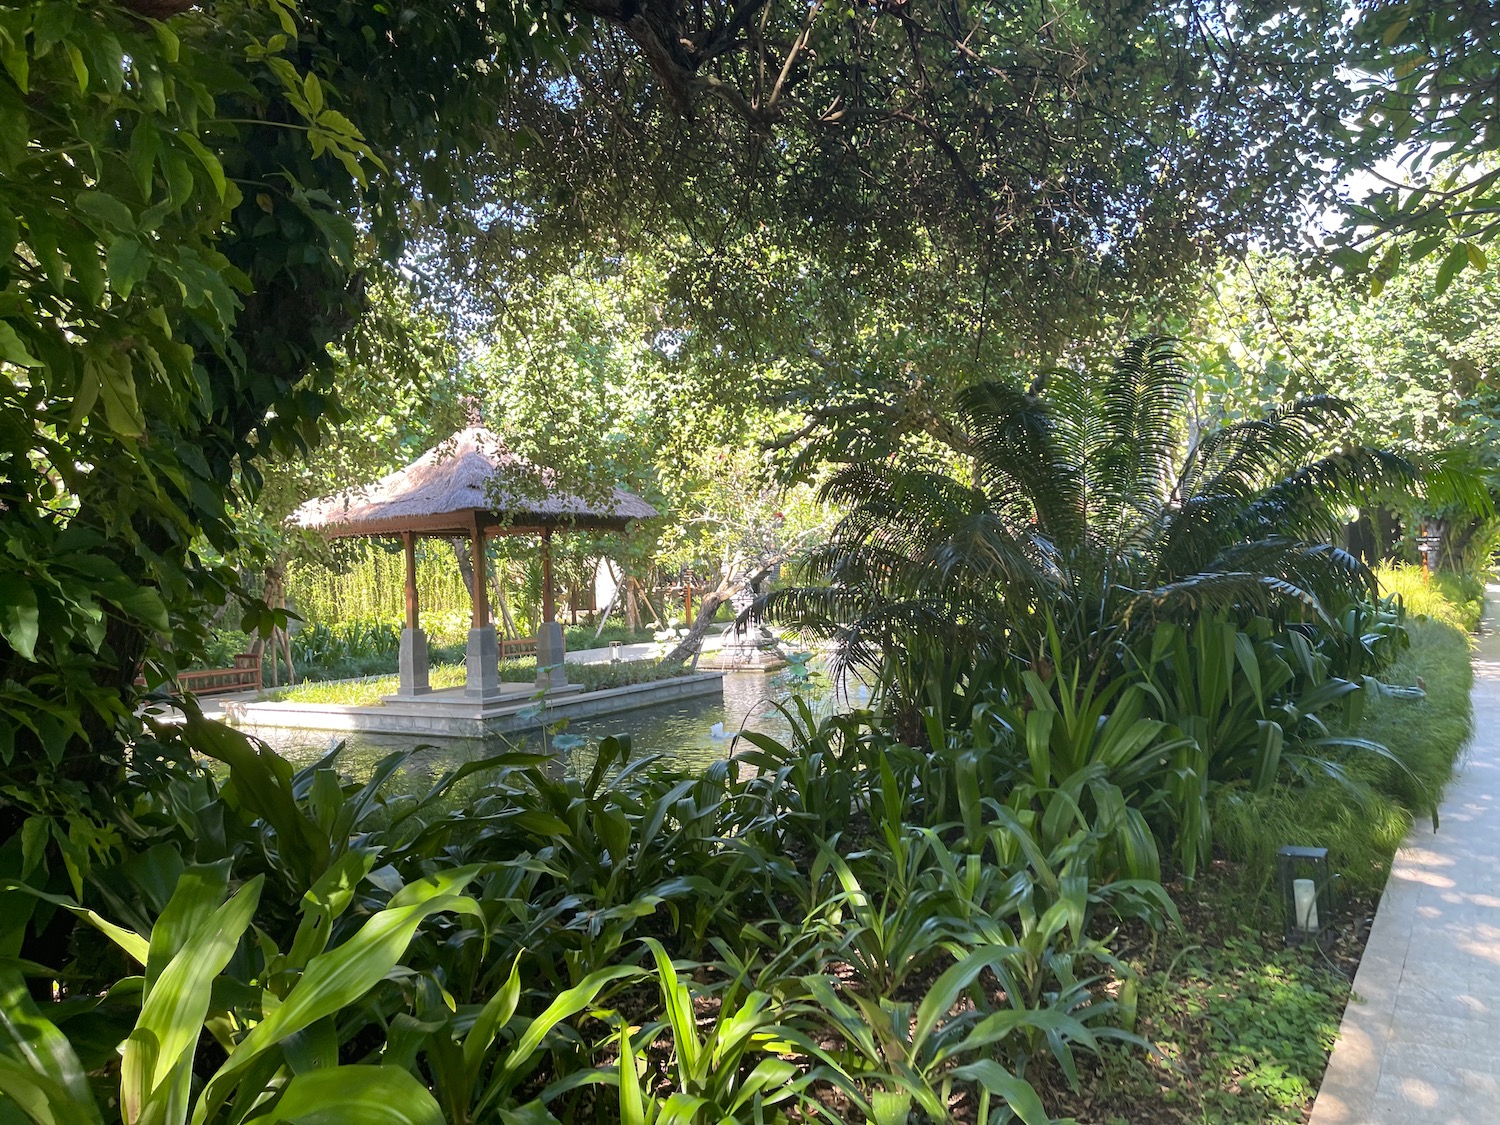 a gazebo next to a pond surrounded by trees